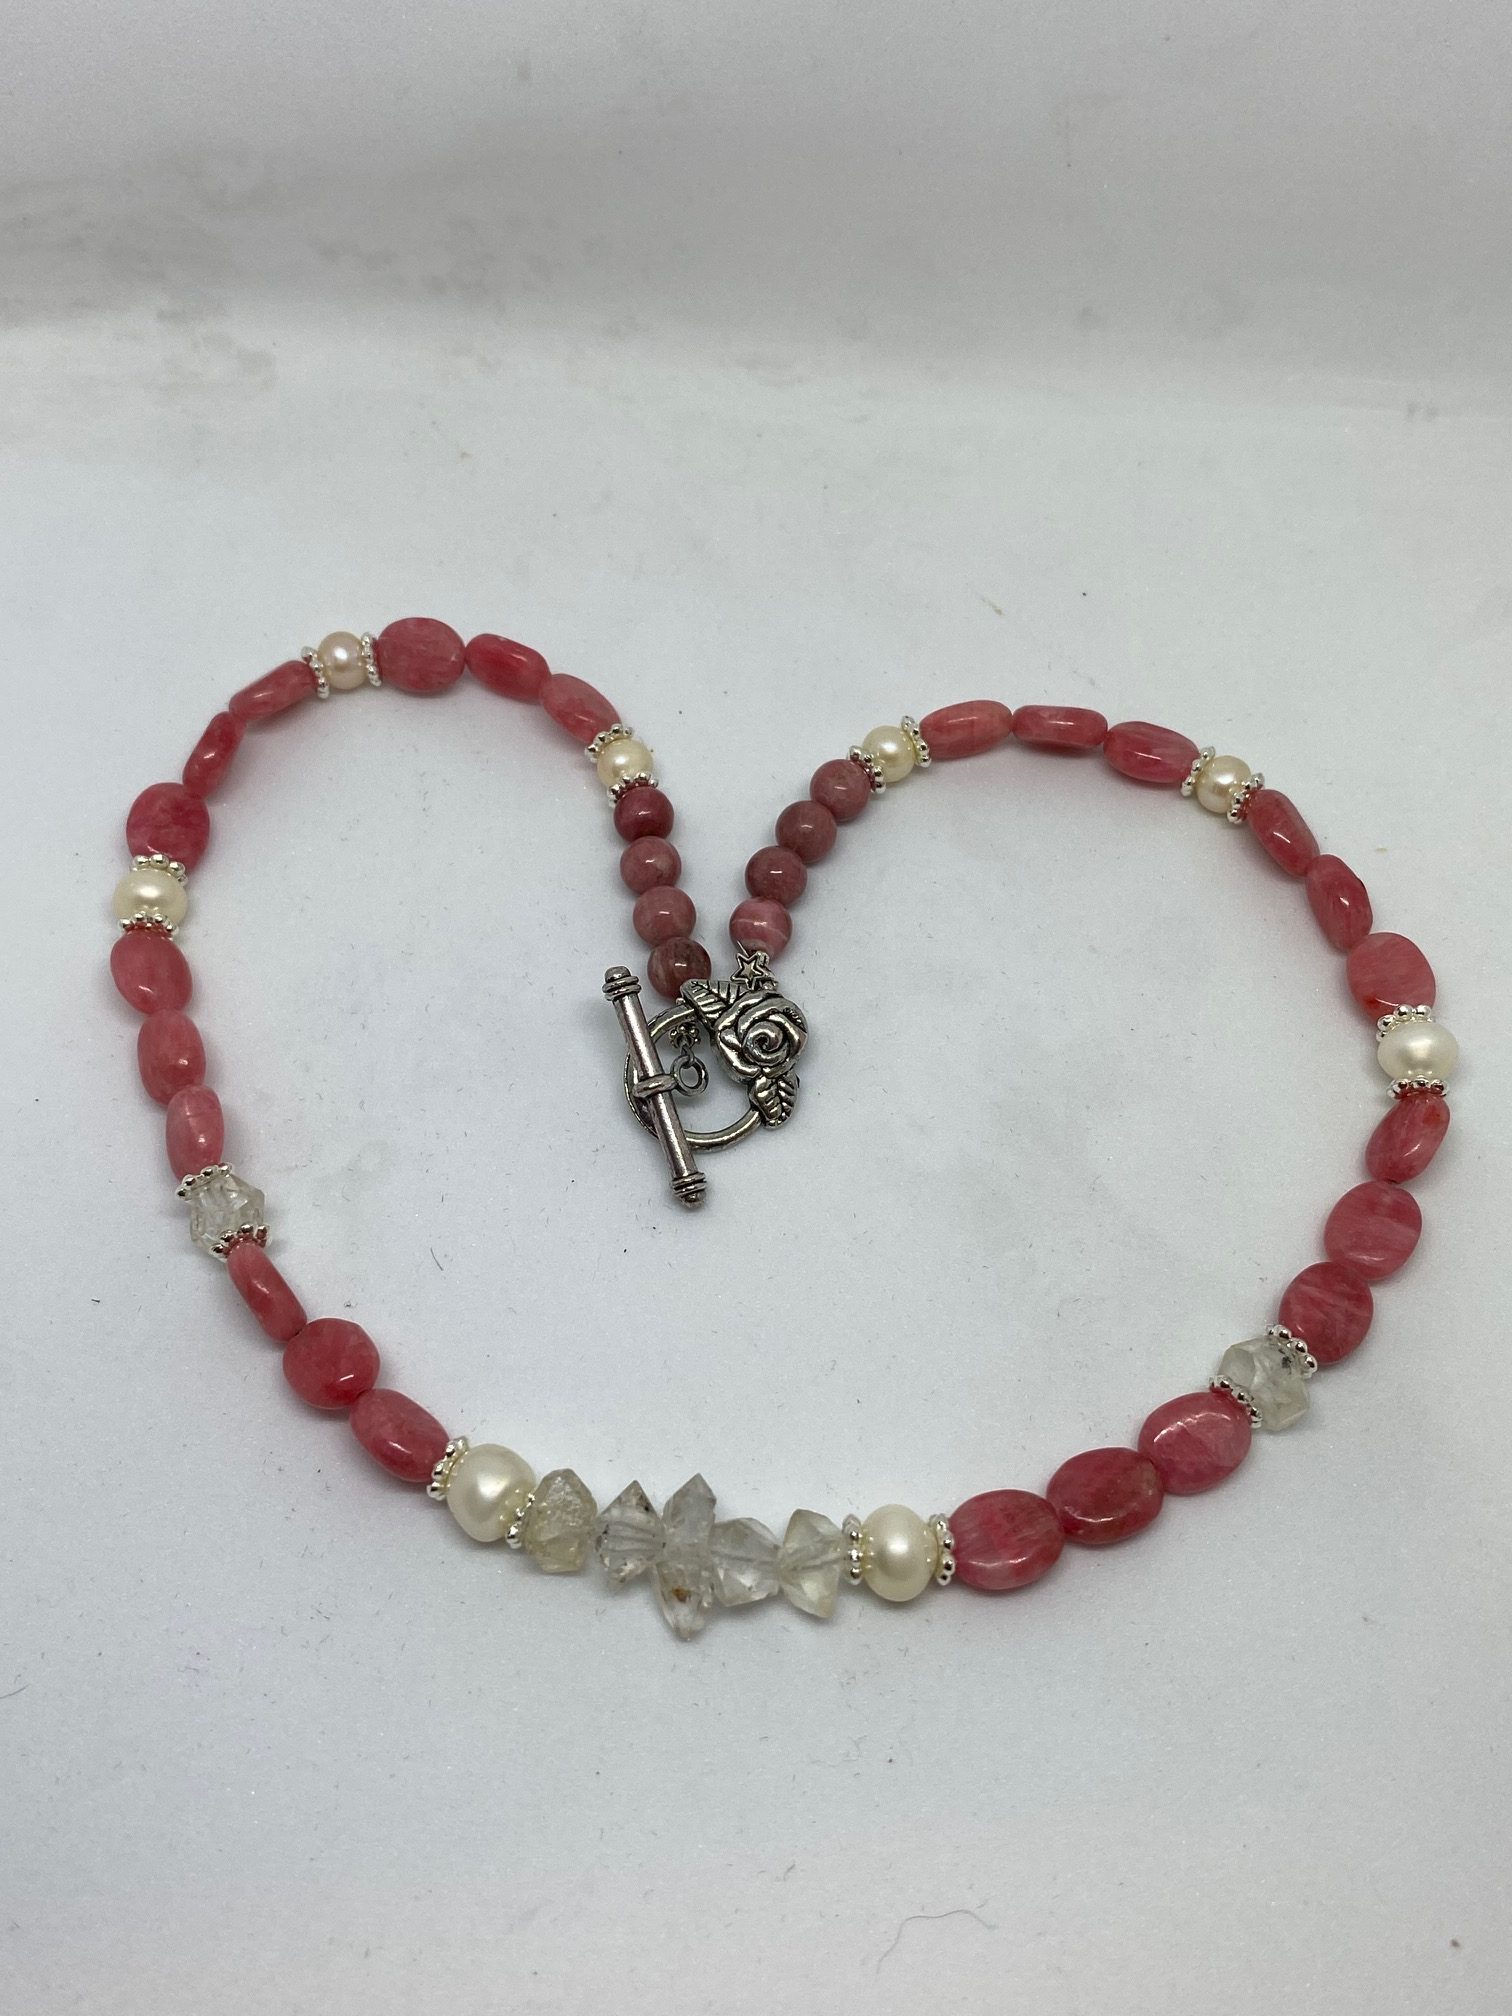 Rhodochrosite, Pearl, and Herkimer Diamond Necklace This necklace promotes Joy, Tranquility, and Bliss.